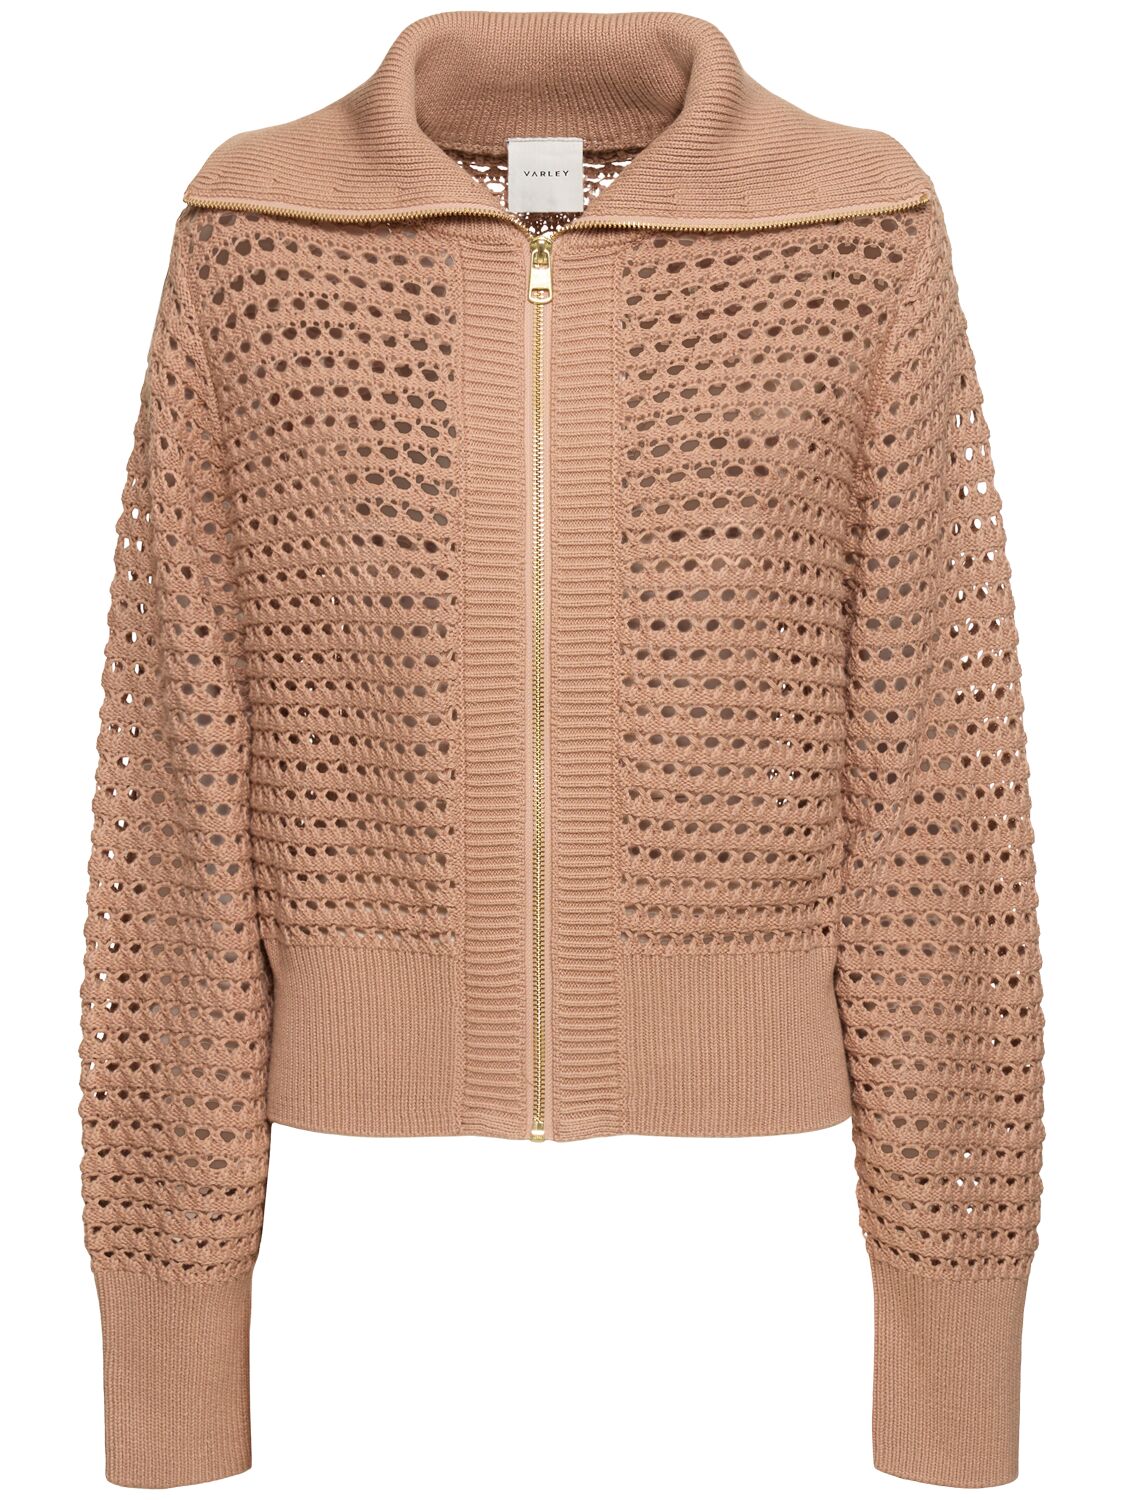 Varley Eloise Full Knit Zip Up Sweater In Warm Taupe